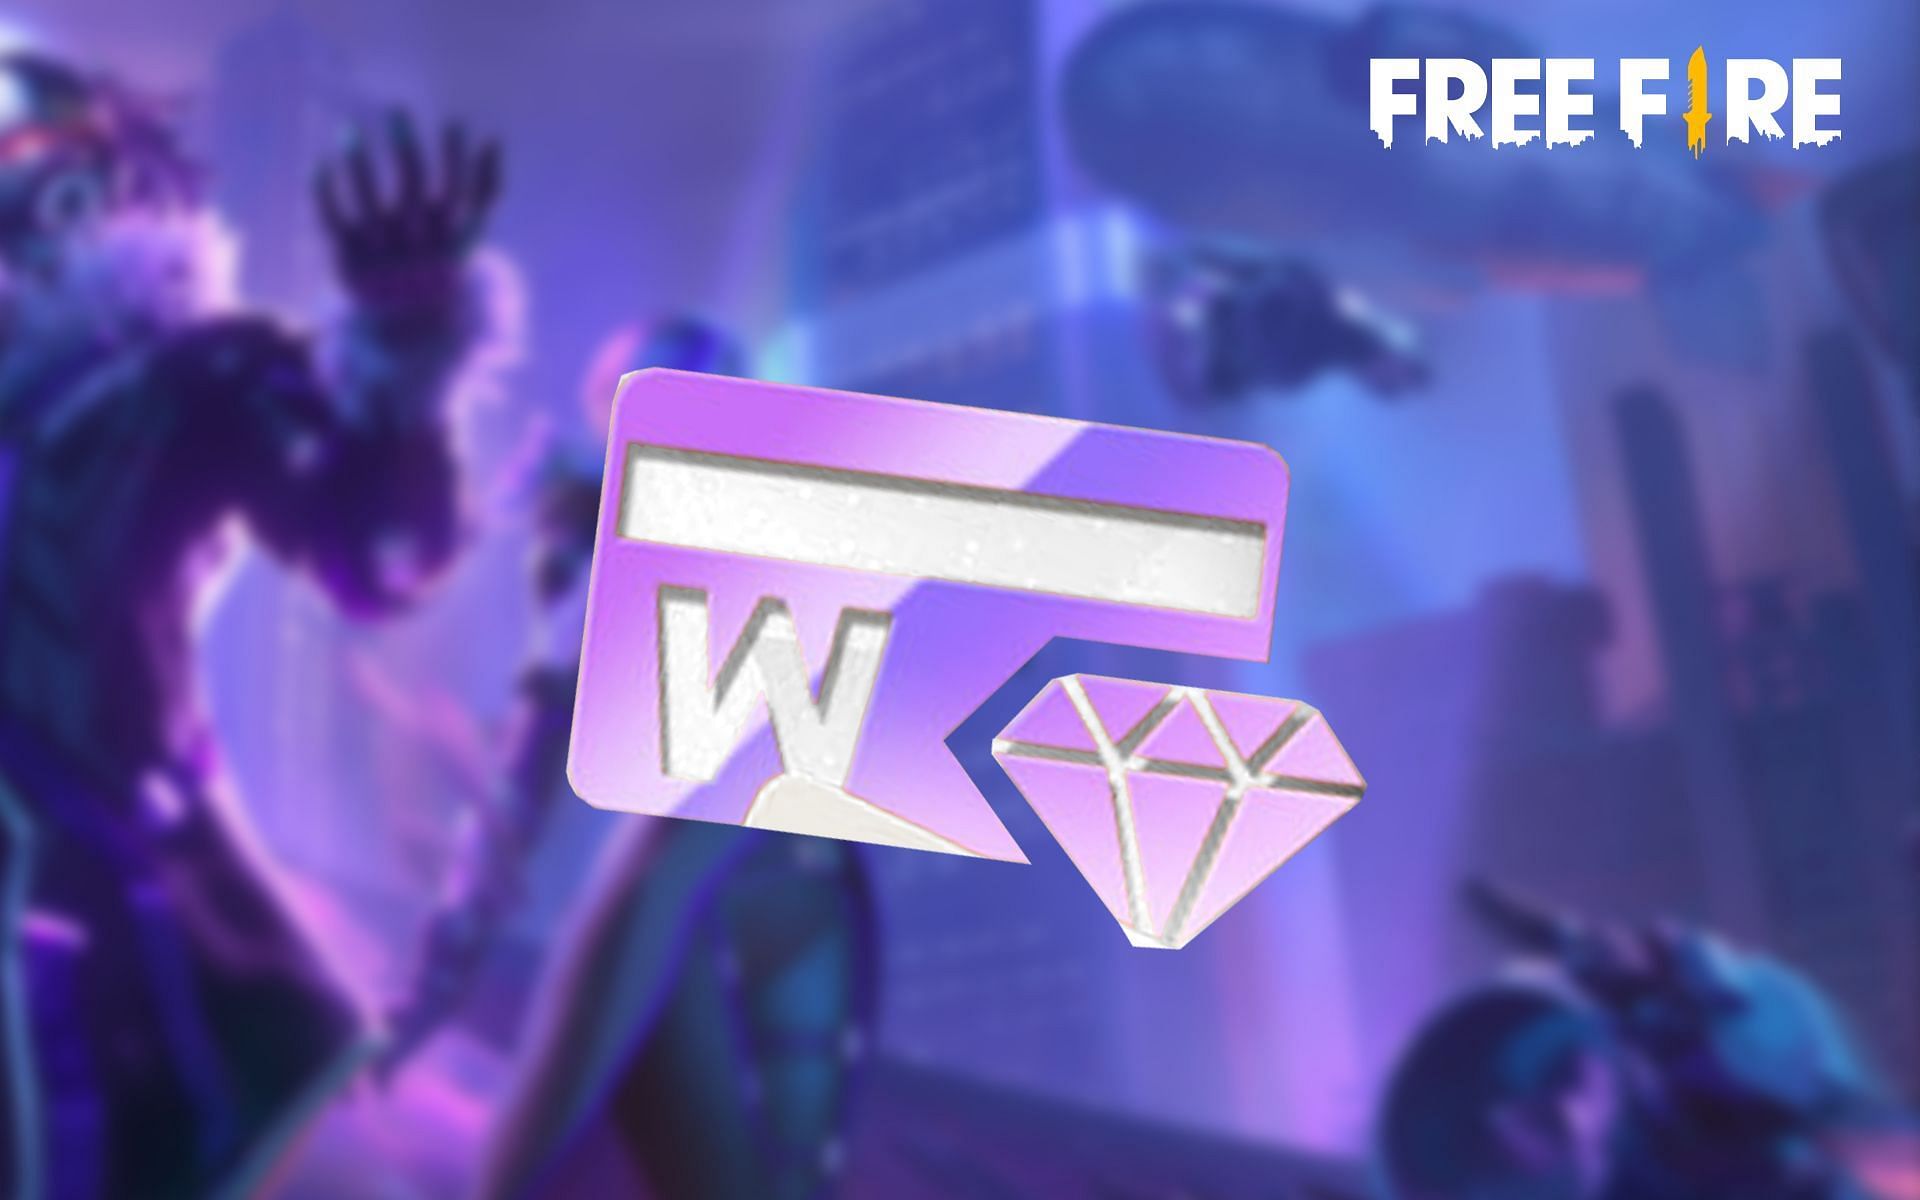 Players can buy diamonds at a cheap rate via the Weekly membership in Free Fire (Image via Sportskeeda)